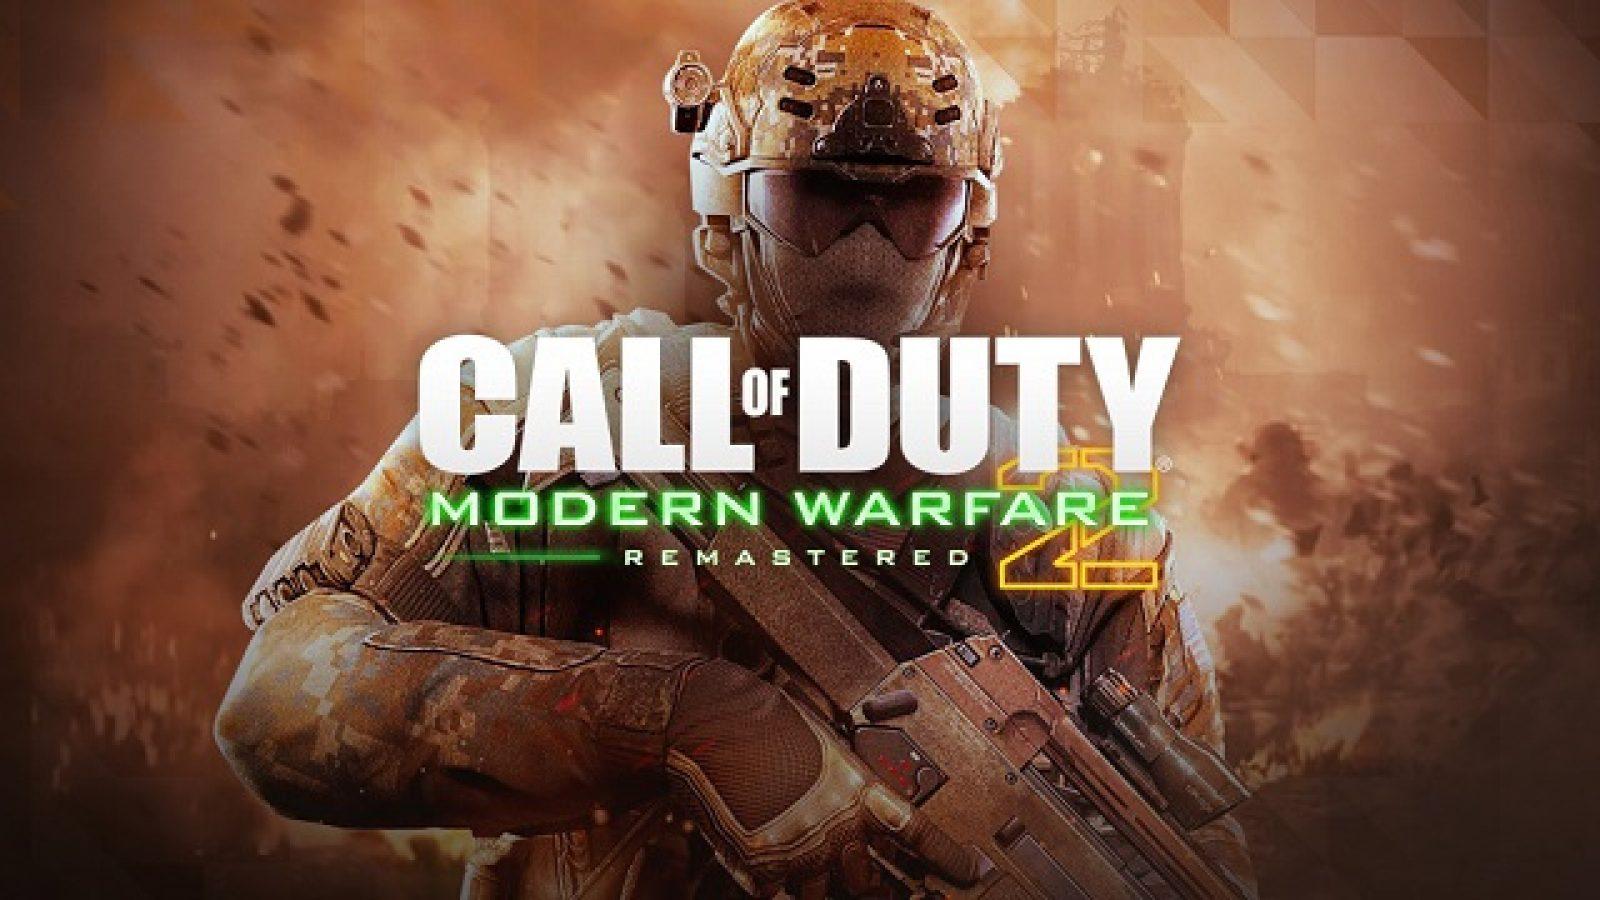 Call of Duty: Modern Warfare 2 Remastered art uncovered in update files